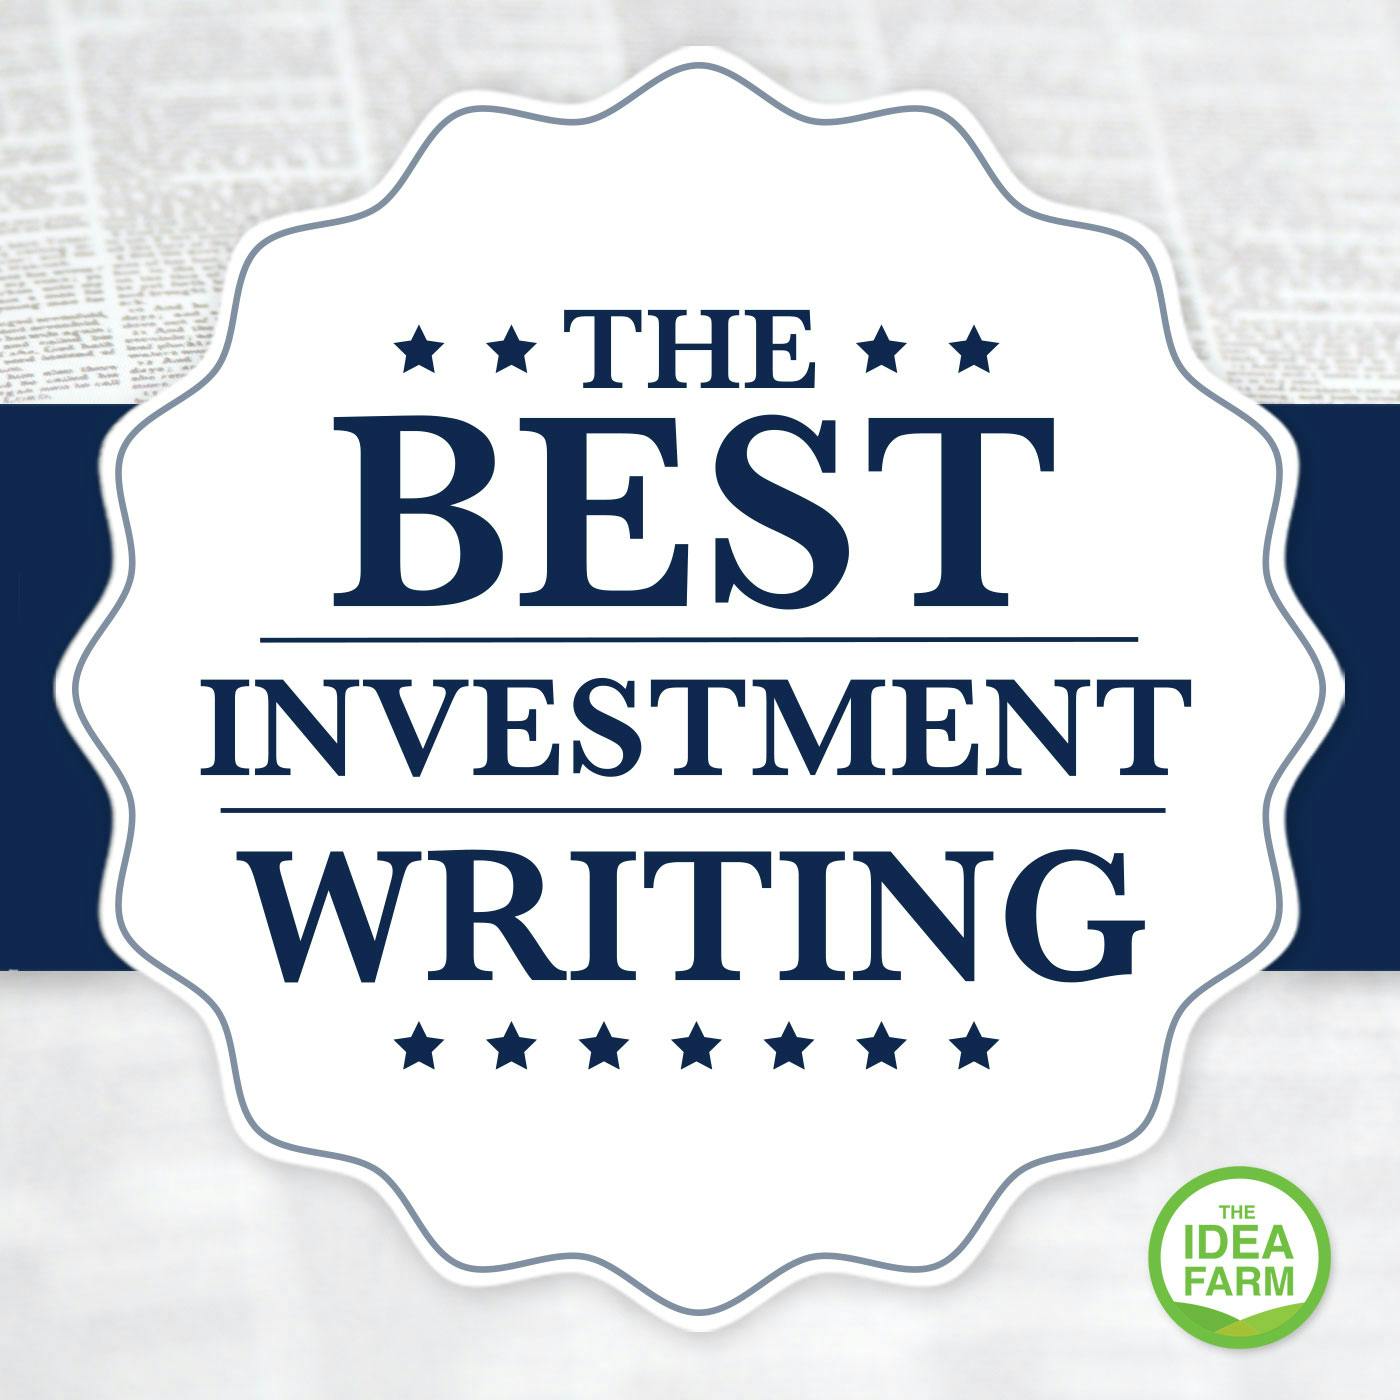 The Best Investment Writing Volume 3: Ray Micaletti – The Smart Money Indicator: A New Risk Management Tool